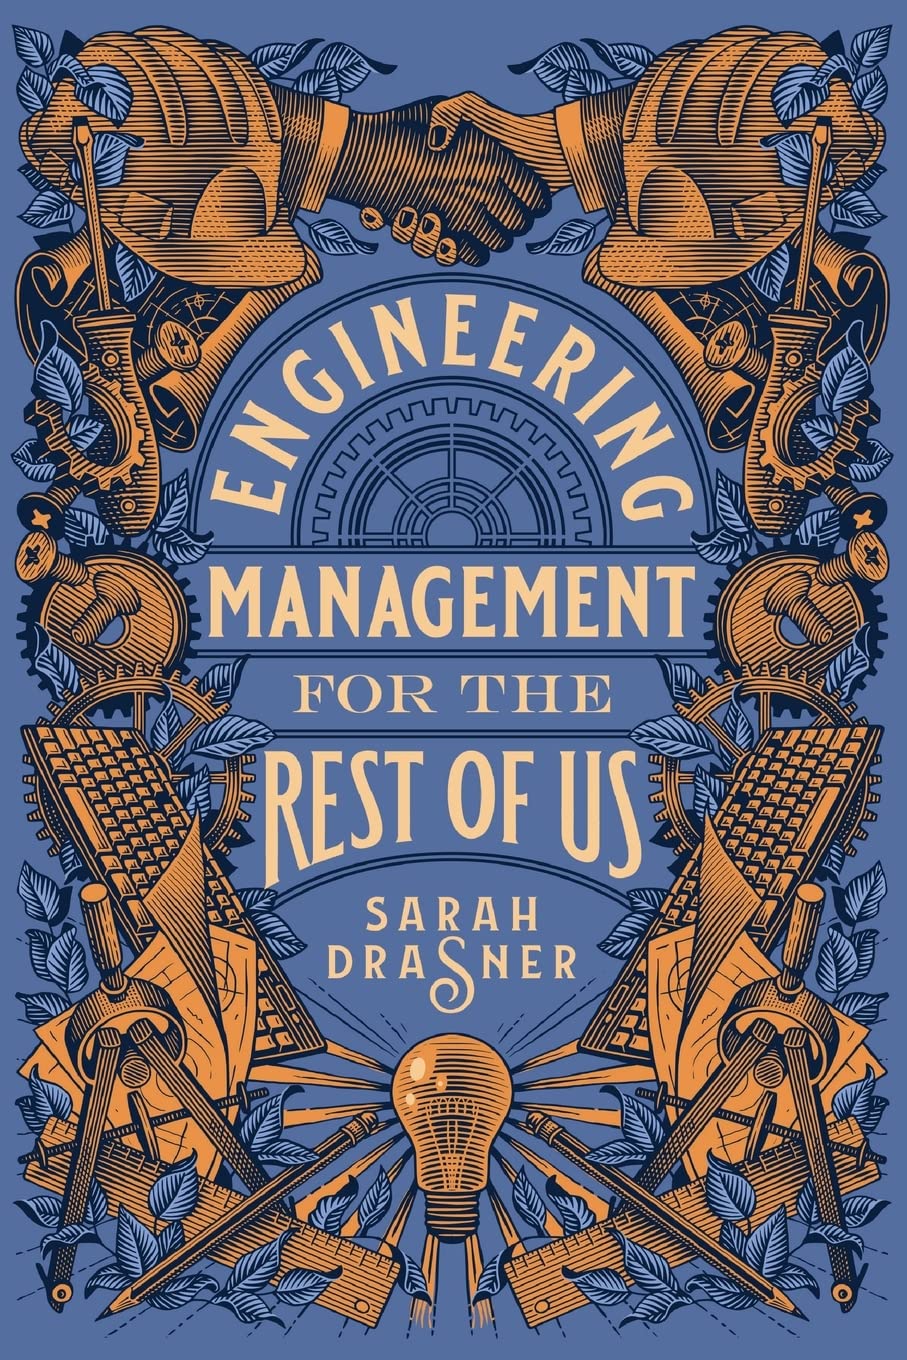 Sarah Drasner: Engineering Management for the Rest of Us (2022, Skill Recordings Inc.)